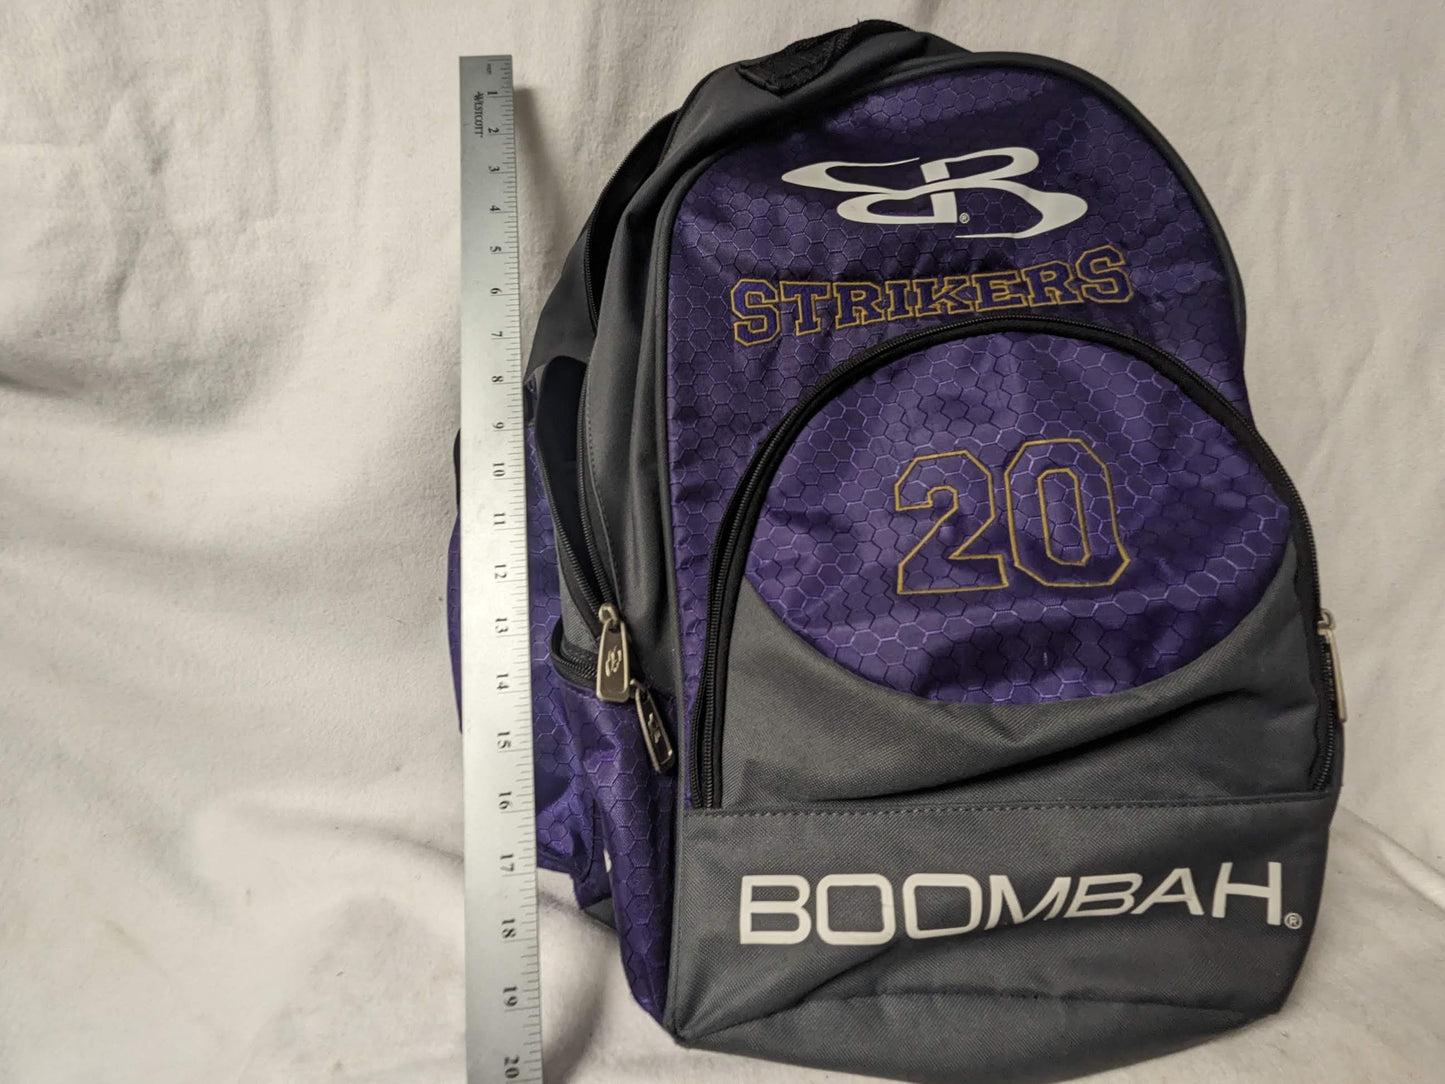 Boombah Baseball/Softball Gear Backpack Size 18 In x 12 In x 9 In Color Purple Condition Used